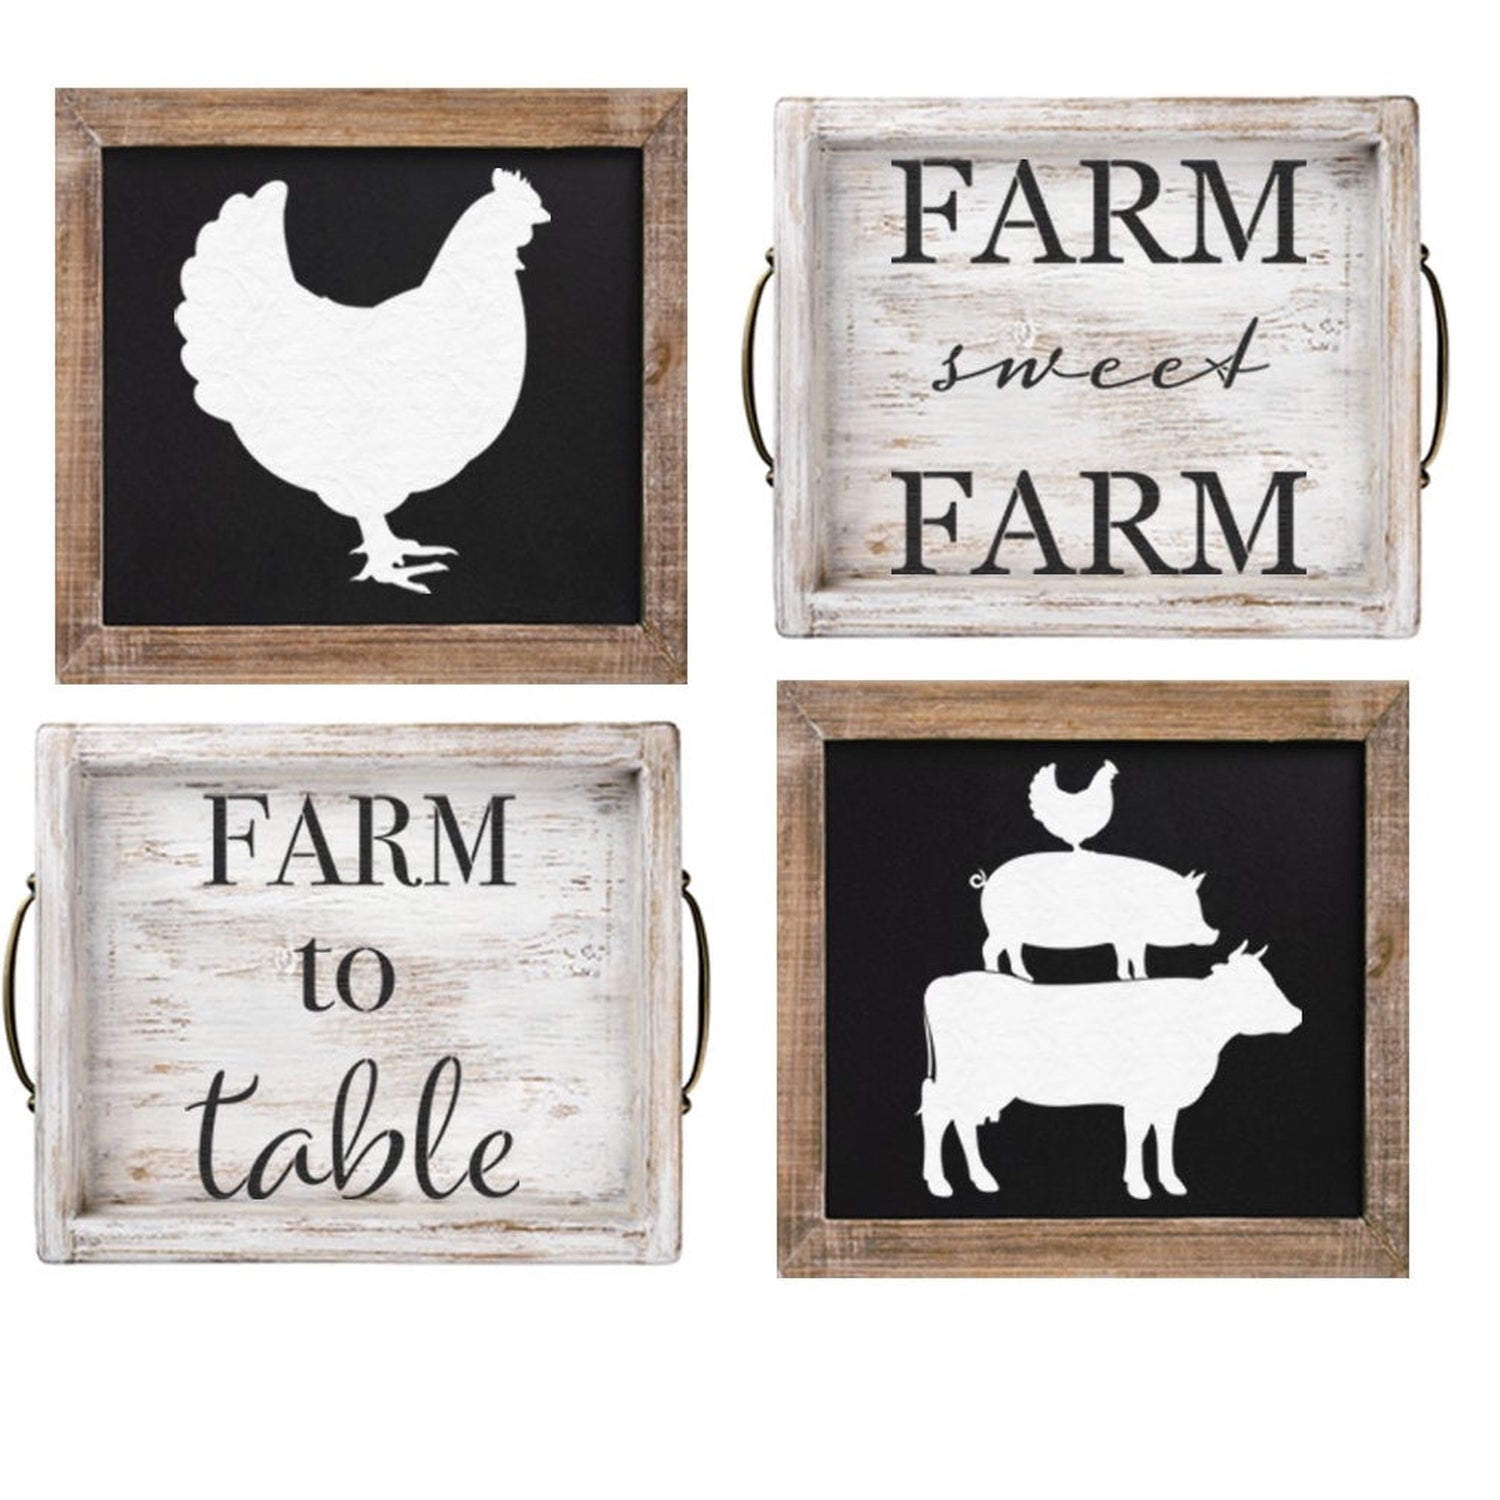 stencils with farmhouse theme, hens, cows, pigs.